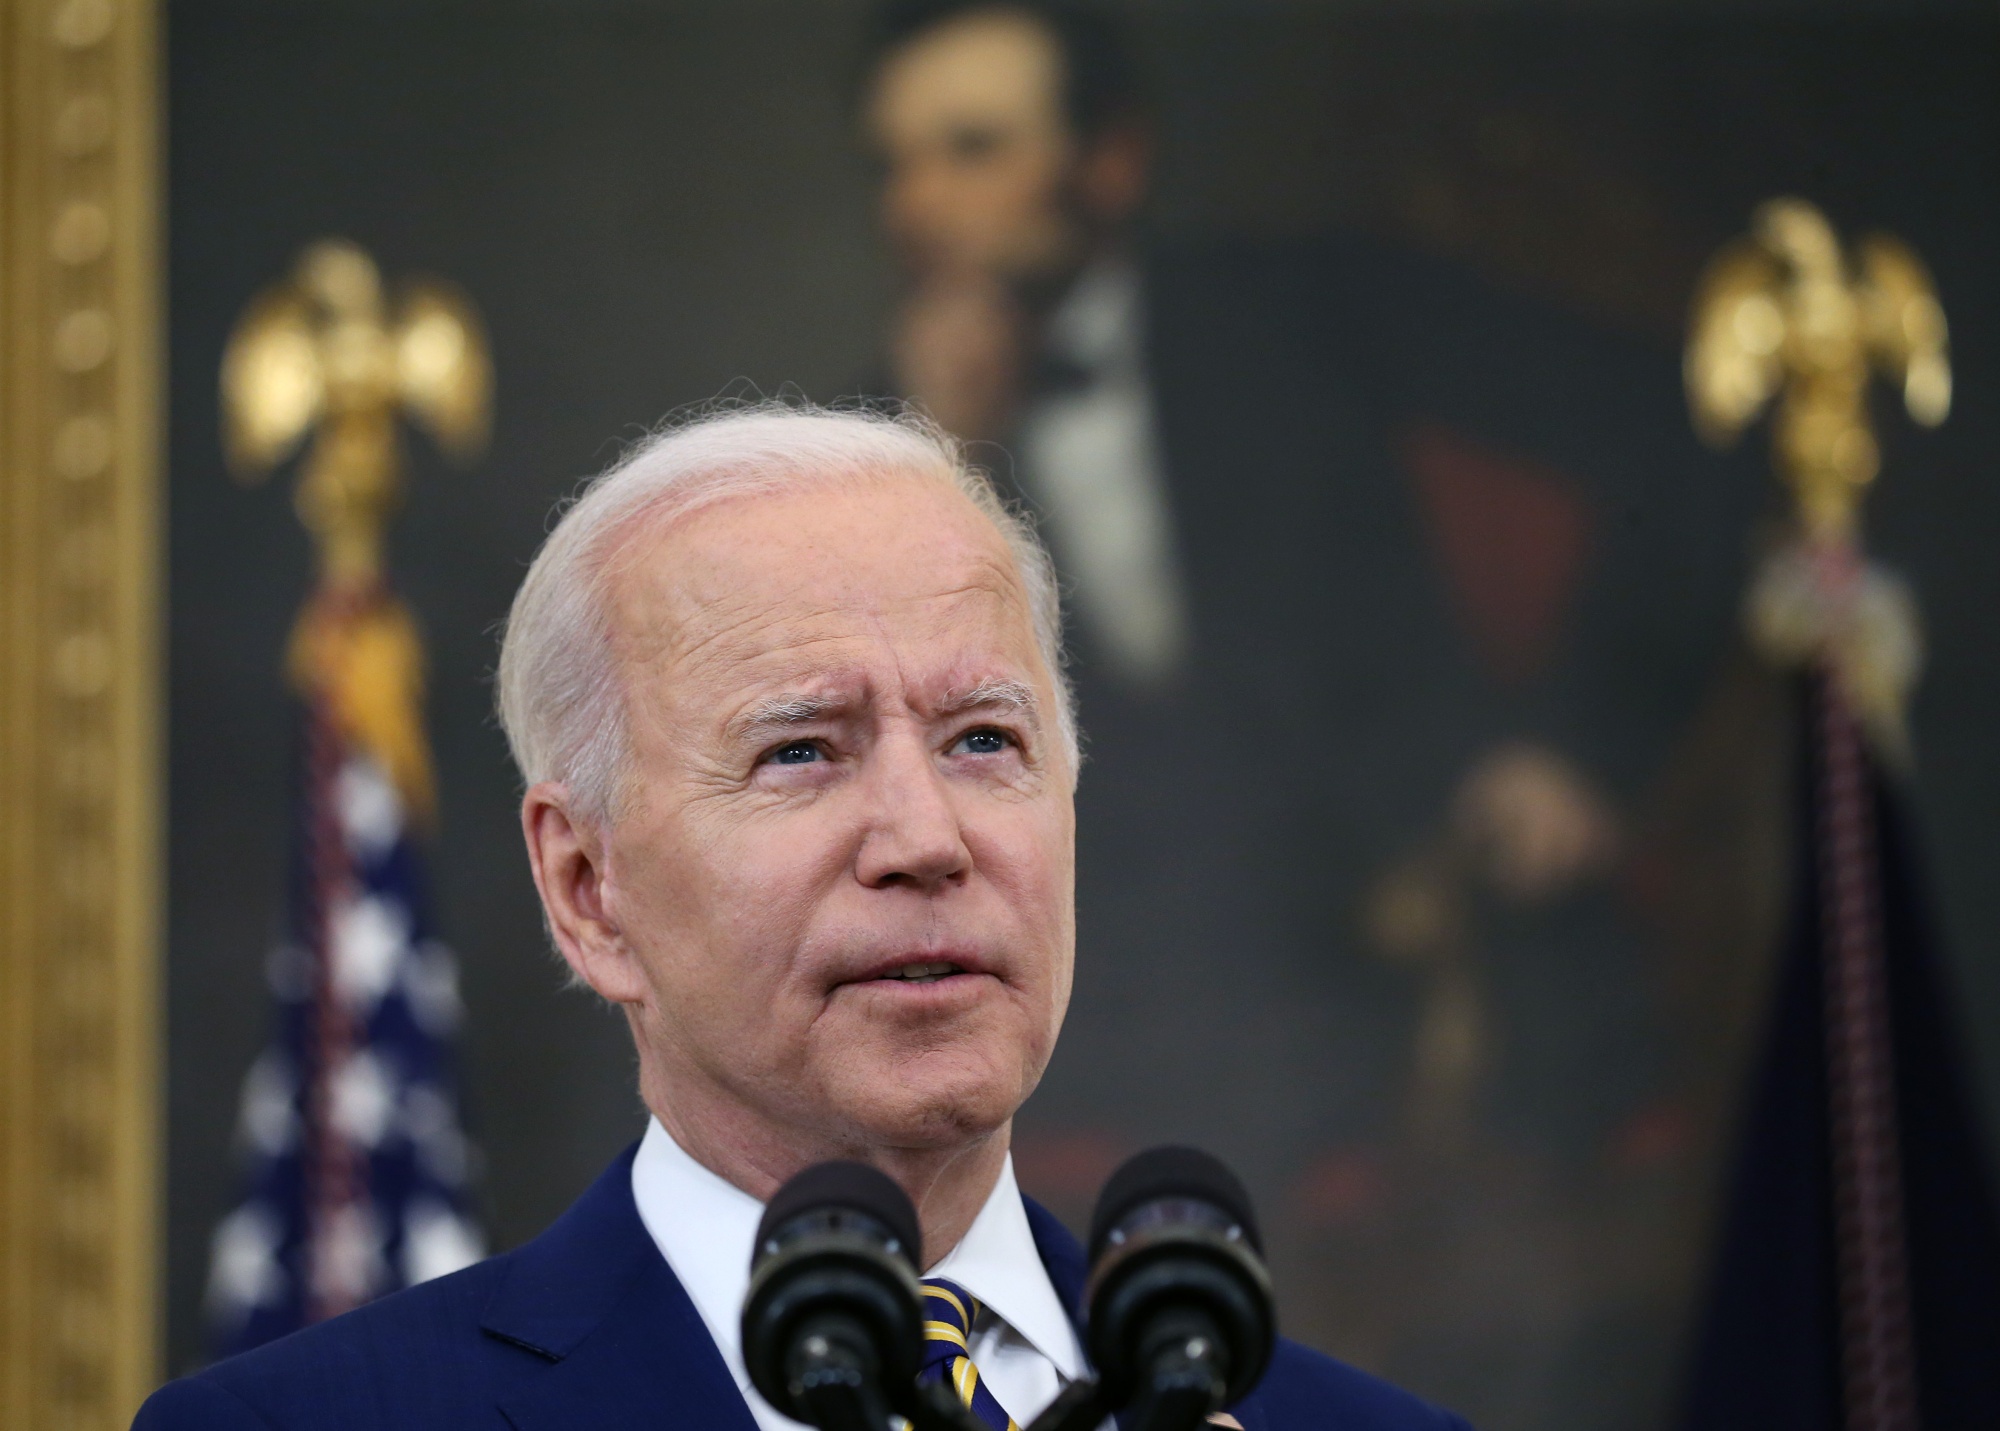 Should India Be Included in Biden's Democracy Alliance? - Bloomberg